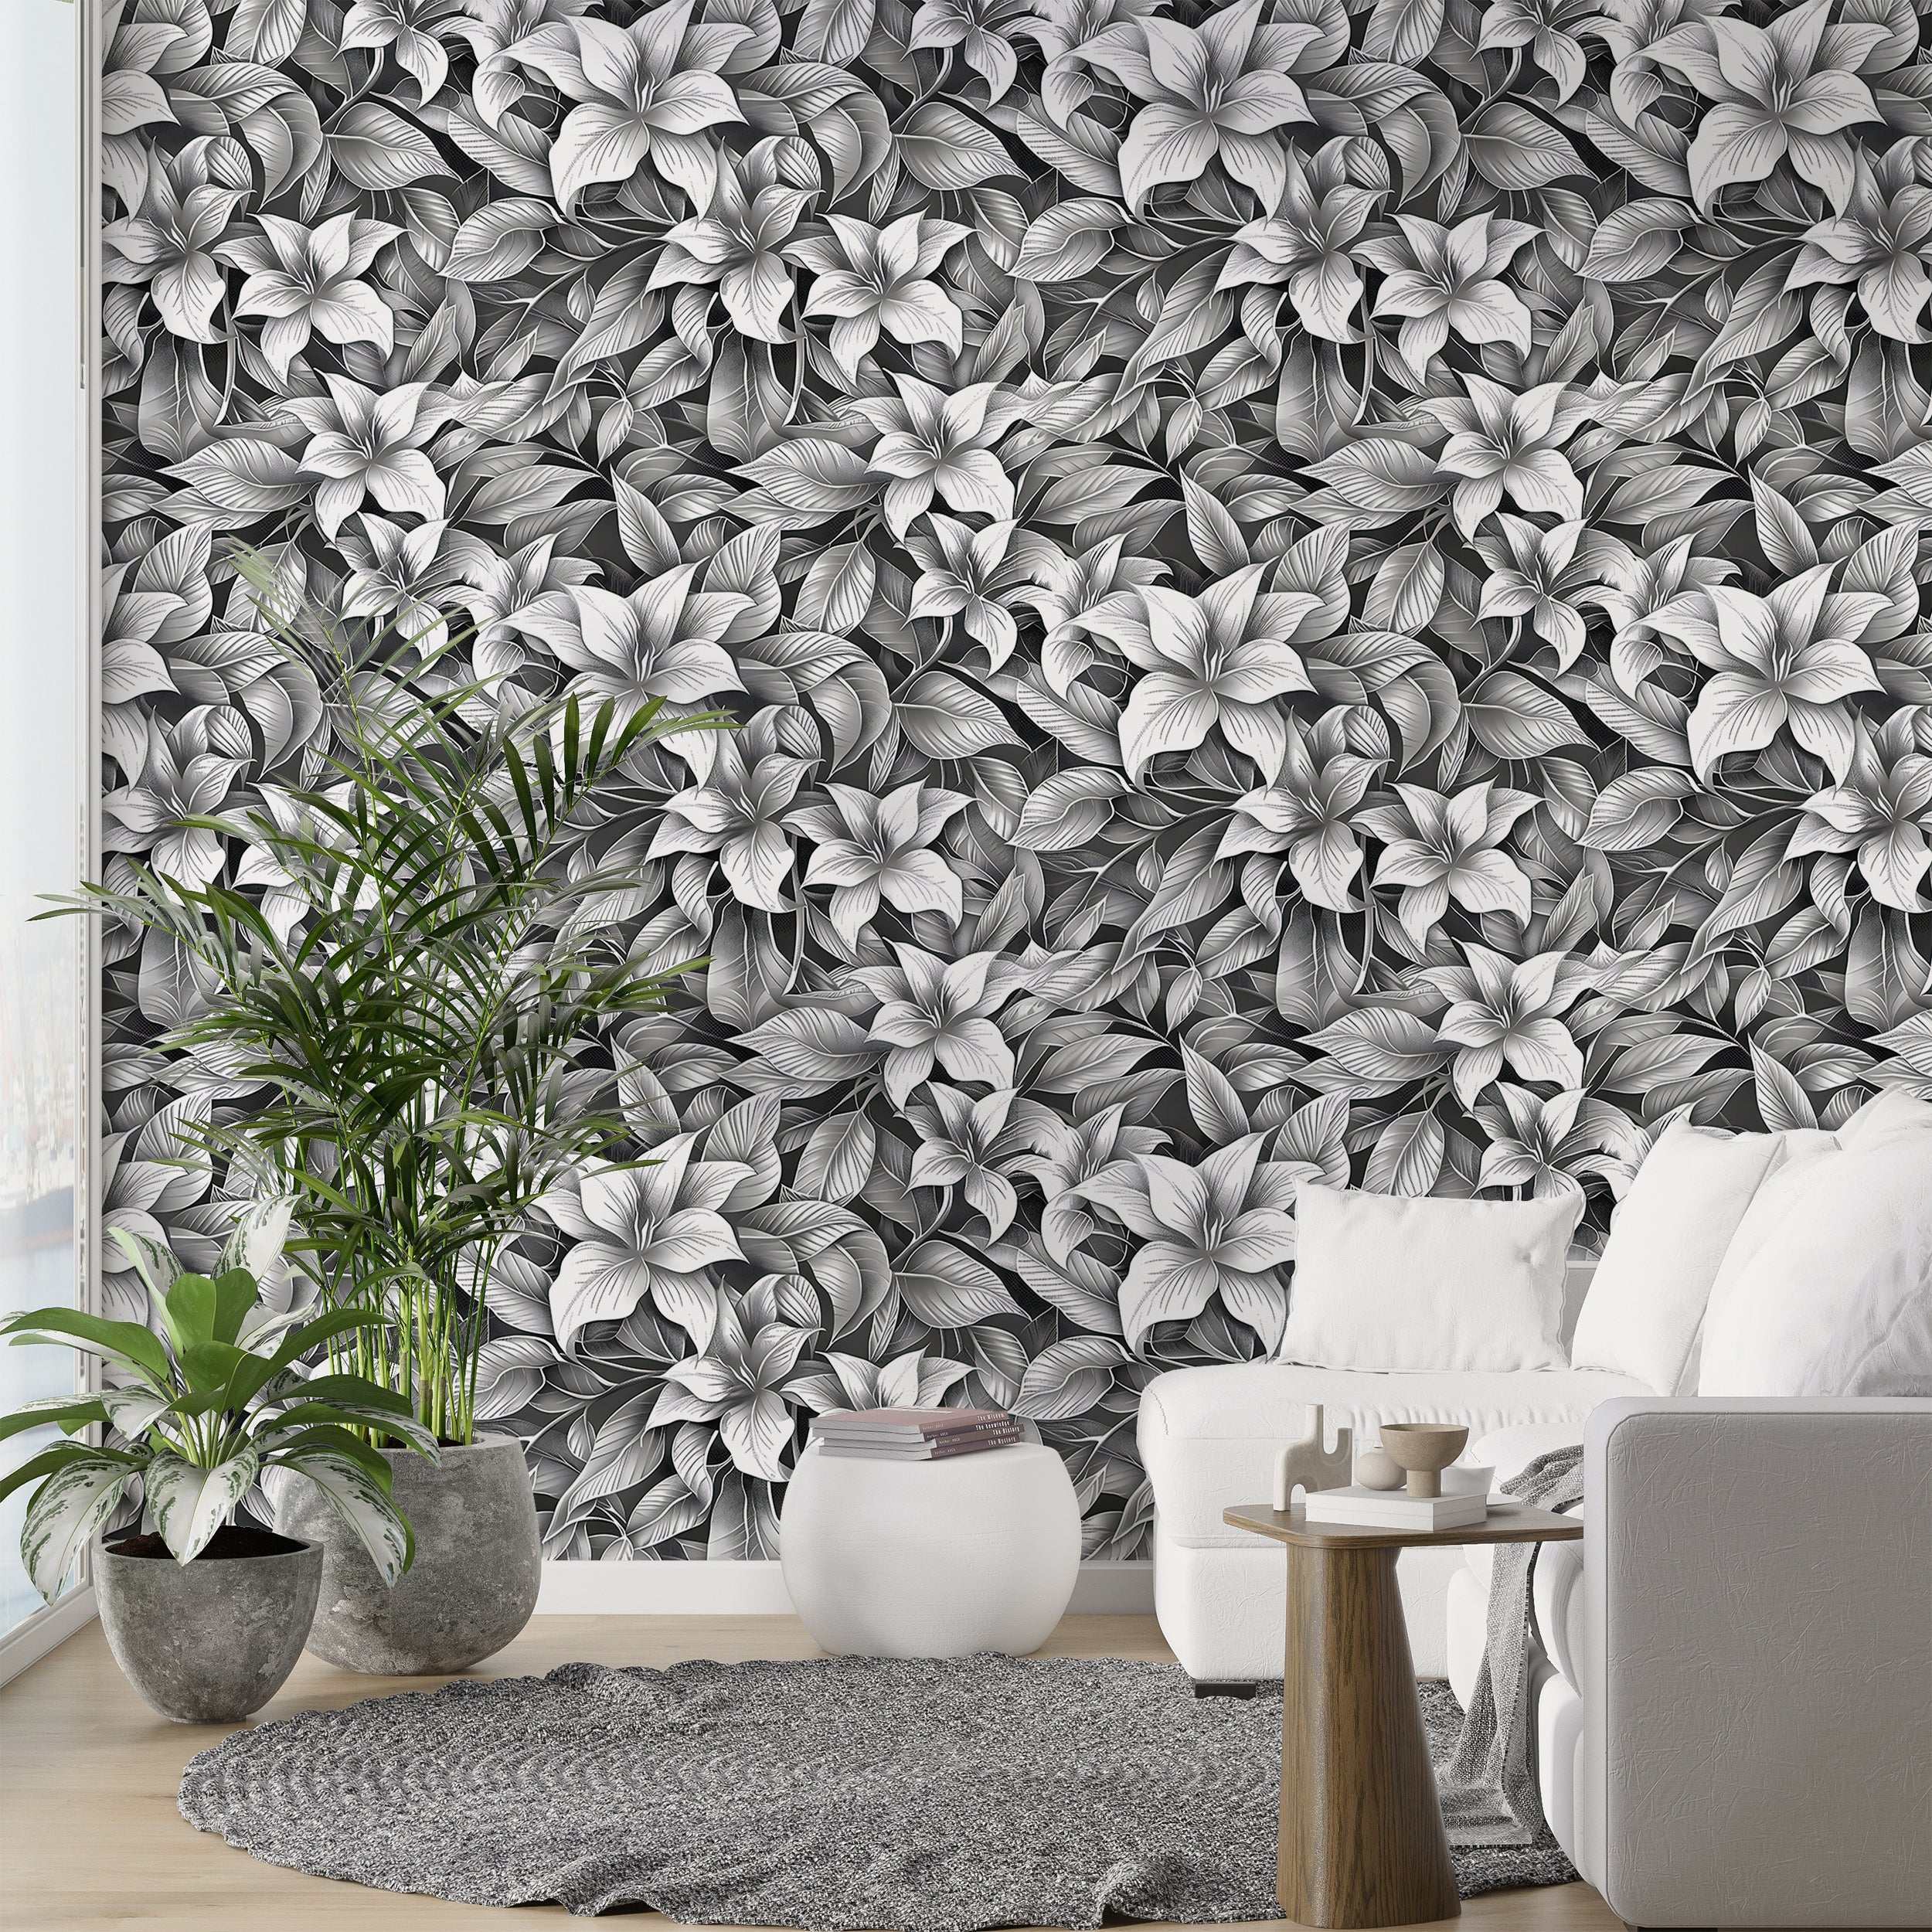 Stippling Style Floral Wallpaper, Peel and Stick Monochrome Flowers Decal, Black and White Floral Wallpaper, Removable Flower Pattern